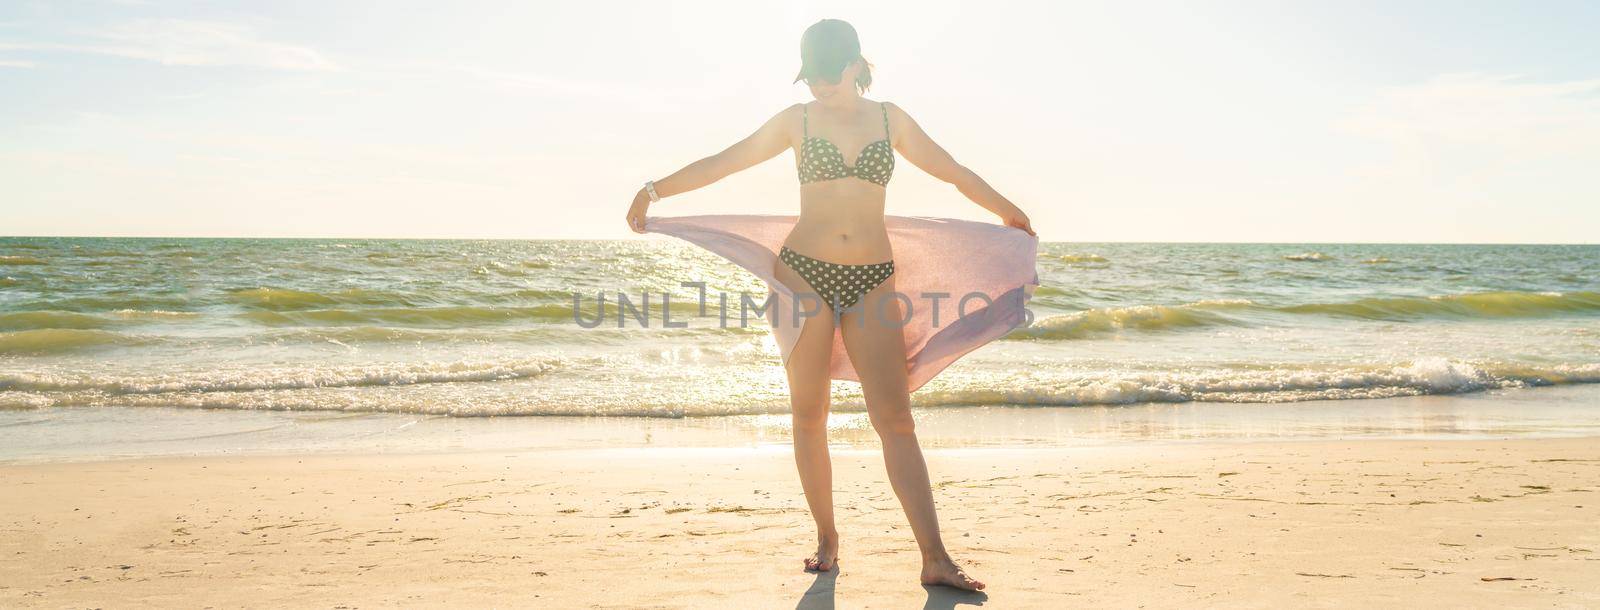 Woman standing with towel on the beach with ocean on background by Mariakray